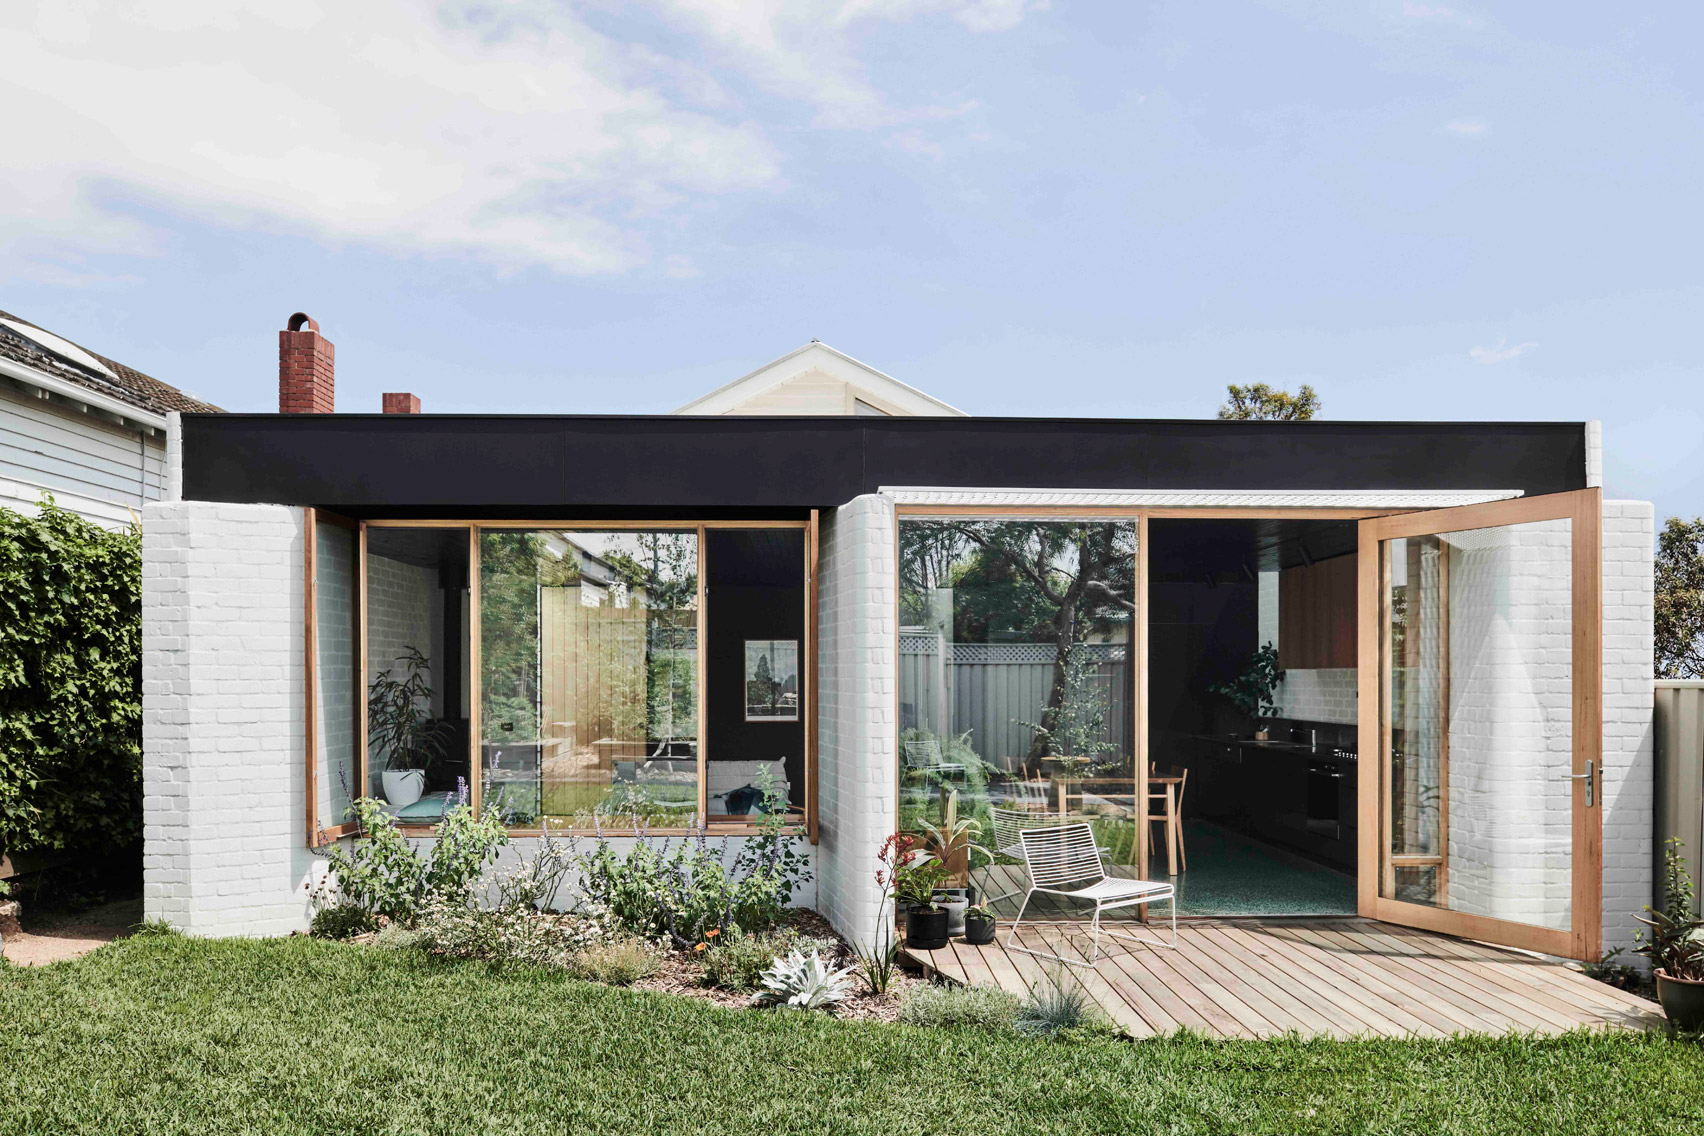 Taylor Knights opens up garden views at Melbourne home with glass-fronted extension